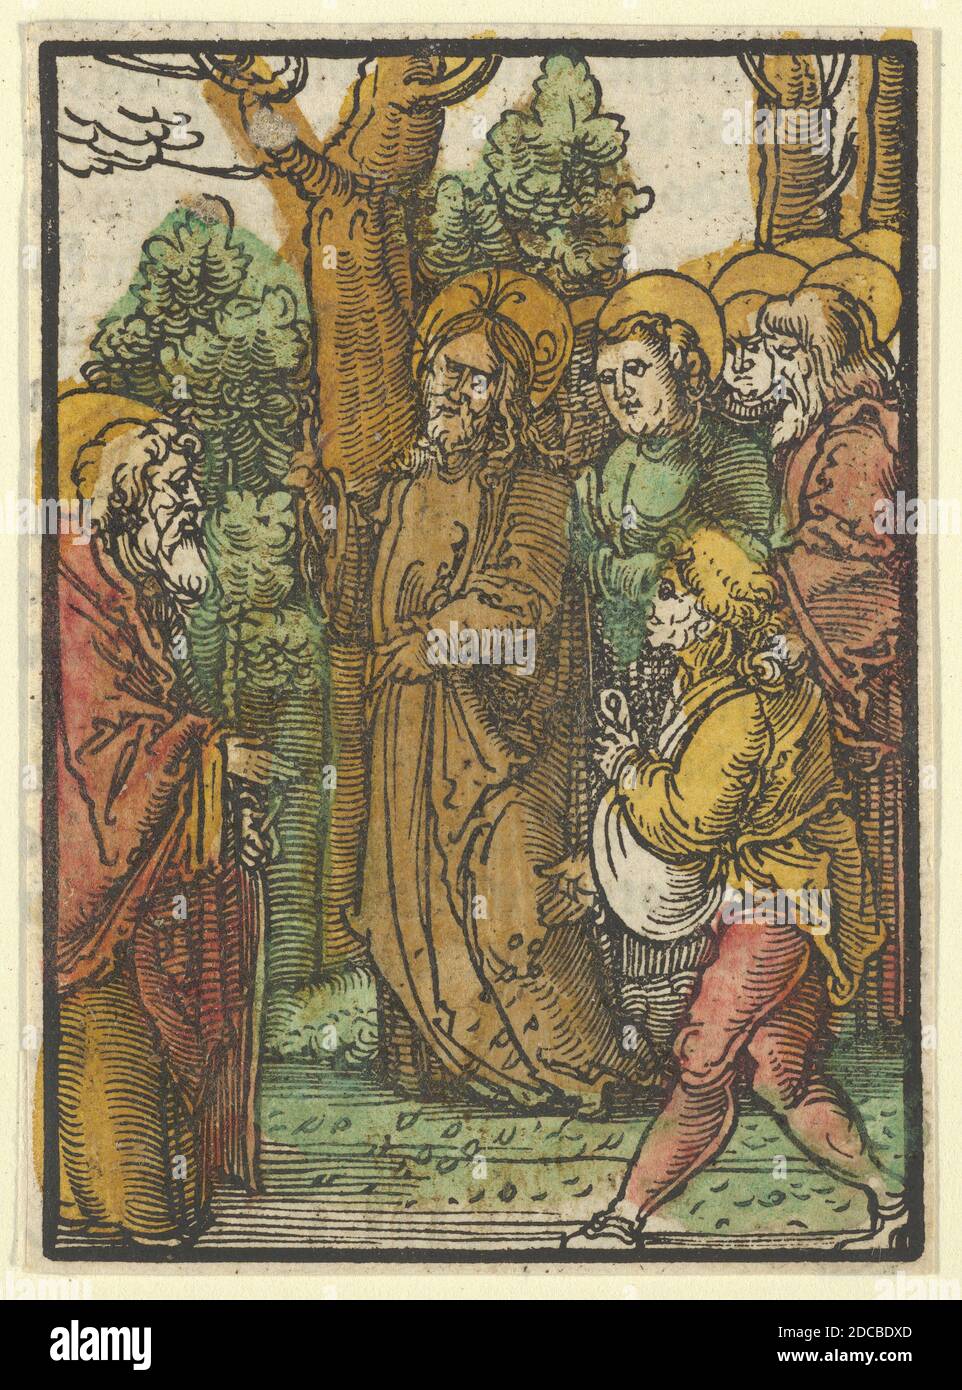 The Parable of the Sower and the Weeds, from Das Plenarium, 1517. Stock Photo